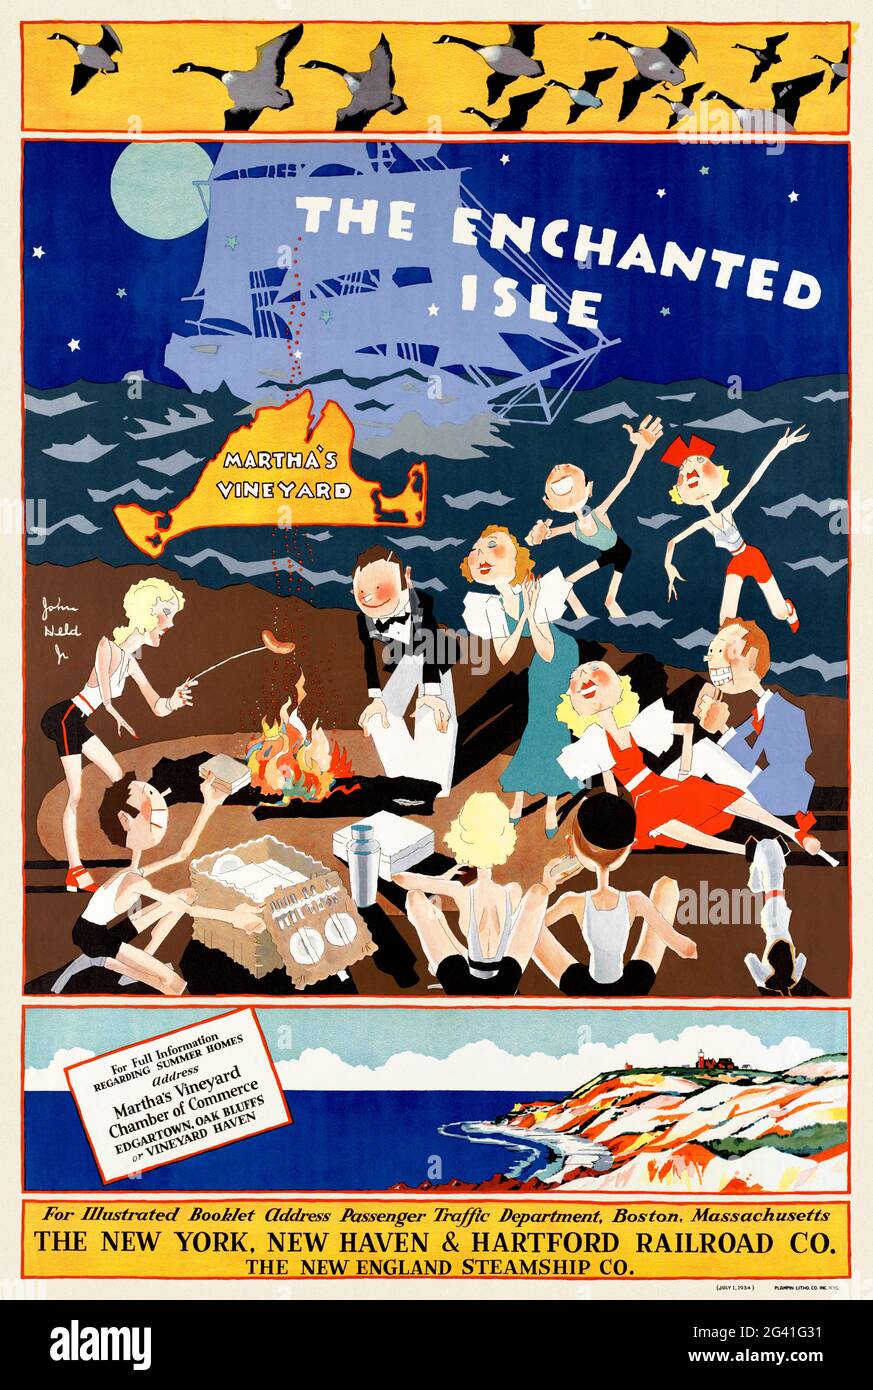 The Enchanted Isle. Martha's Vineyard by John Held Jr. (1889-1958). Restored vintage poster published in 1934 in the USA. Stock Photo